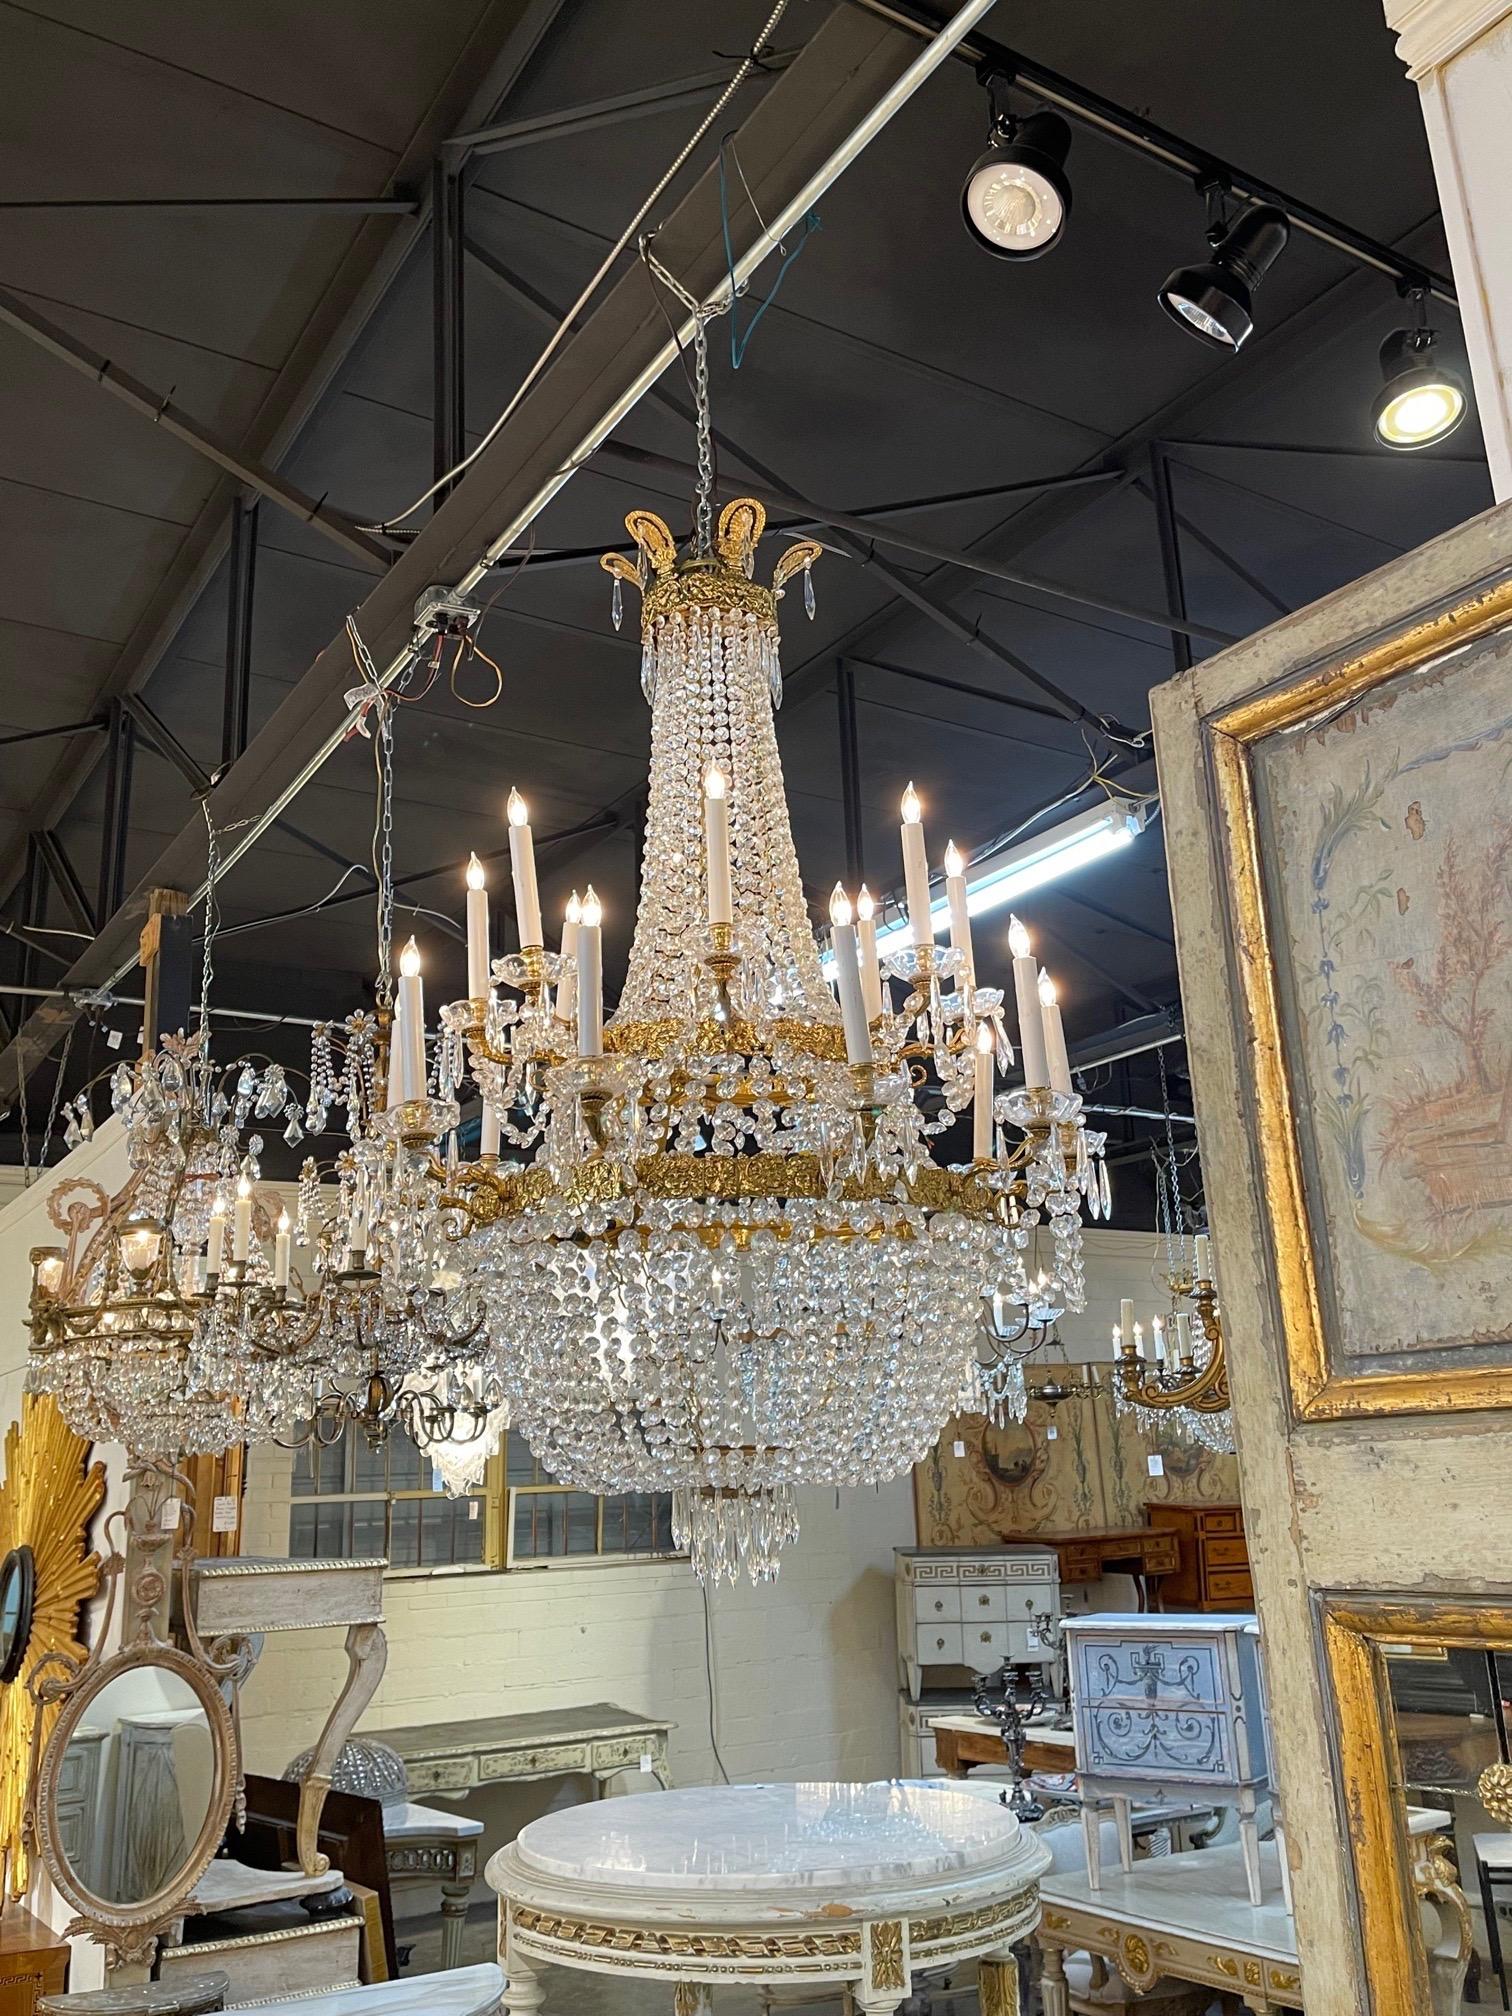 Stunning French Empire style gilt bronze and crystal chandelier with 18 lights. Gorgeous bronze details along with dazzling crystals make a huge impact. An exceptional piece!